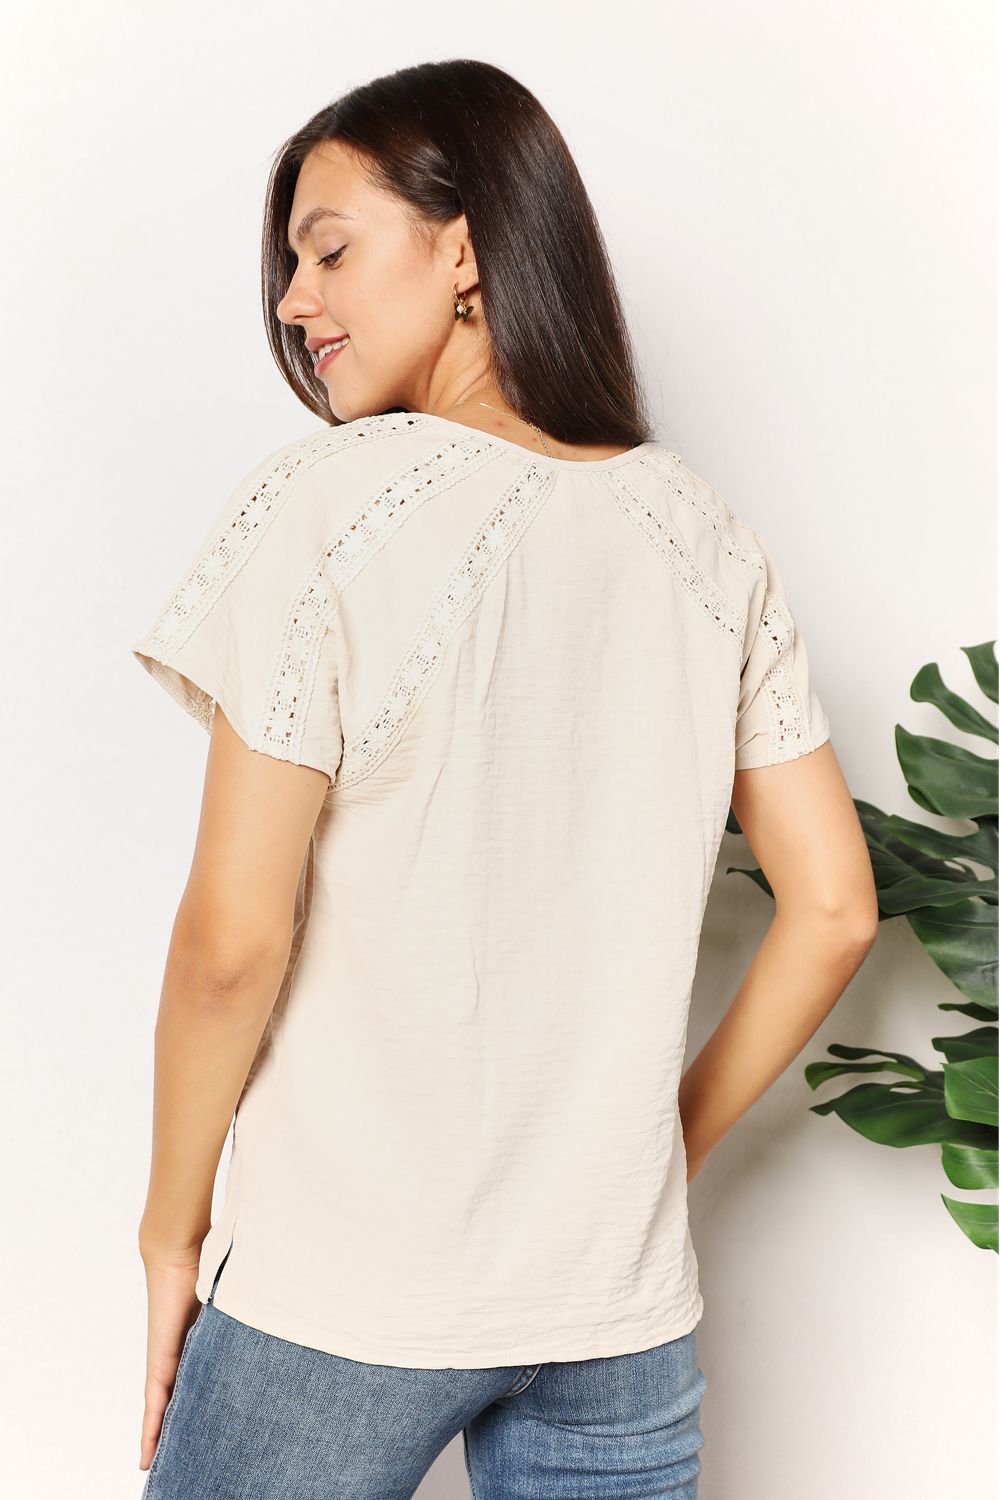 Crochet Buttoned Short Sleeve TopTopDouble Take